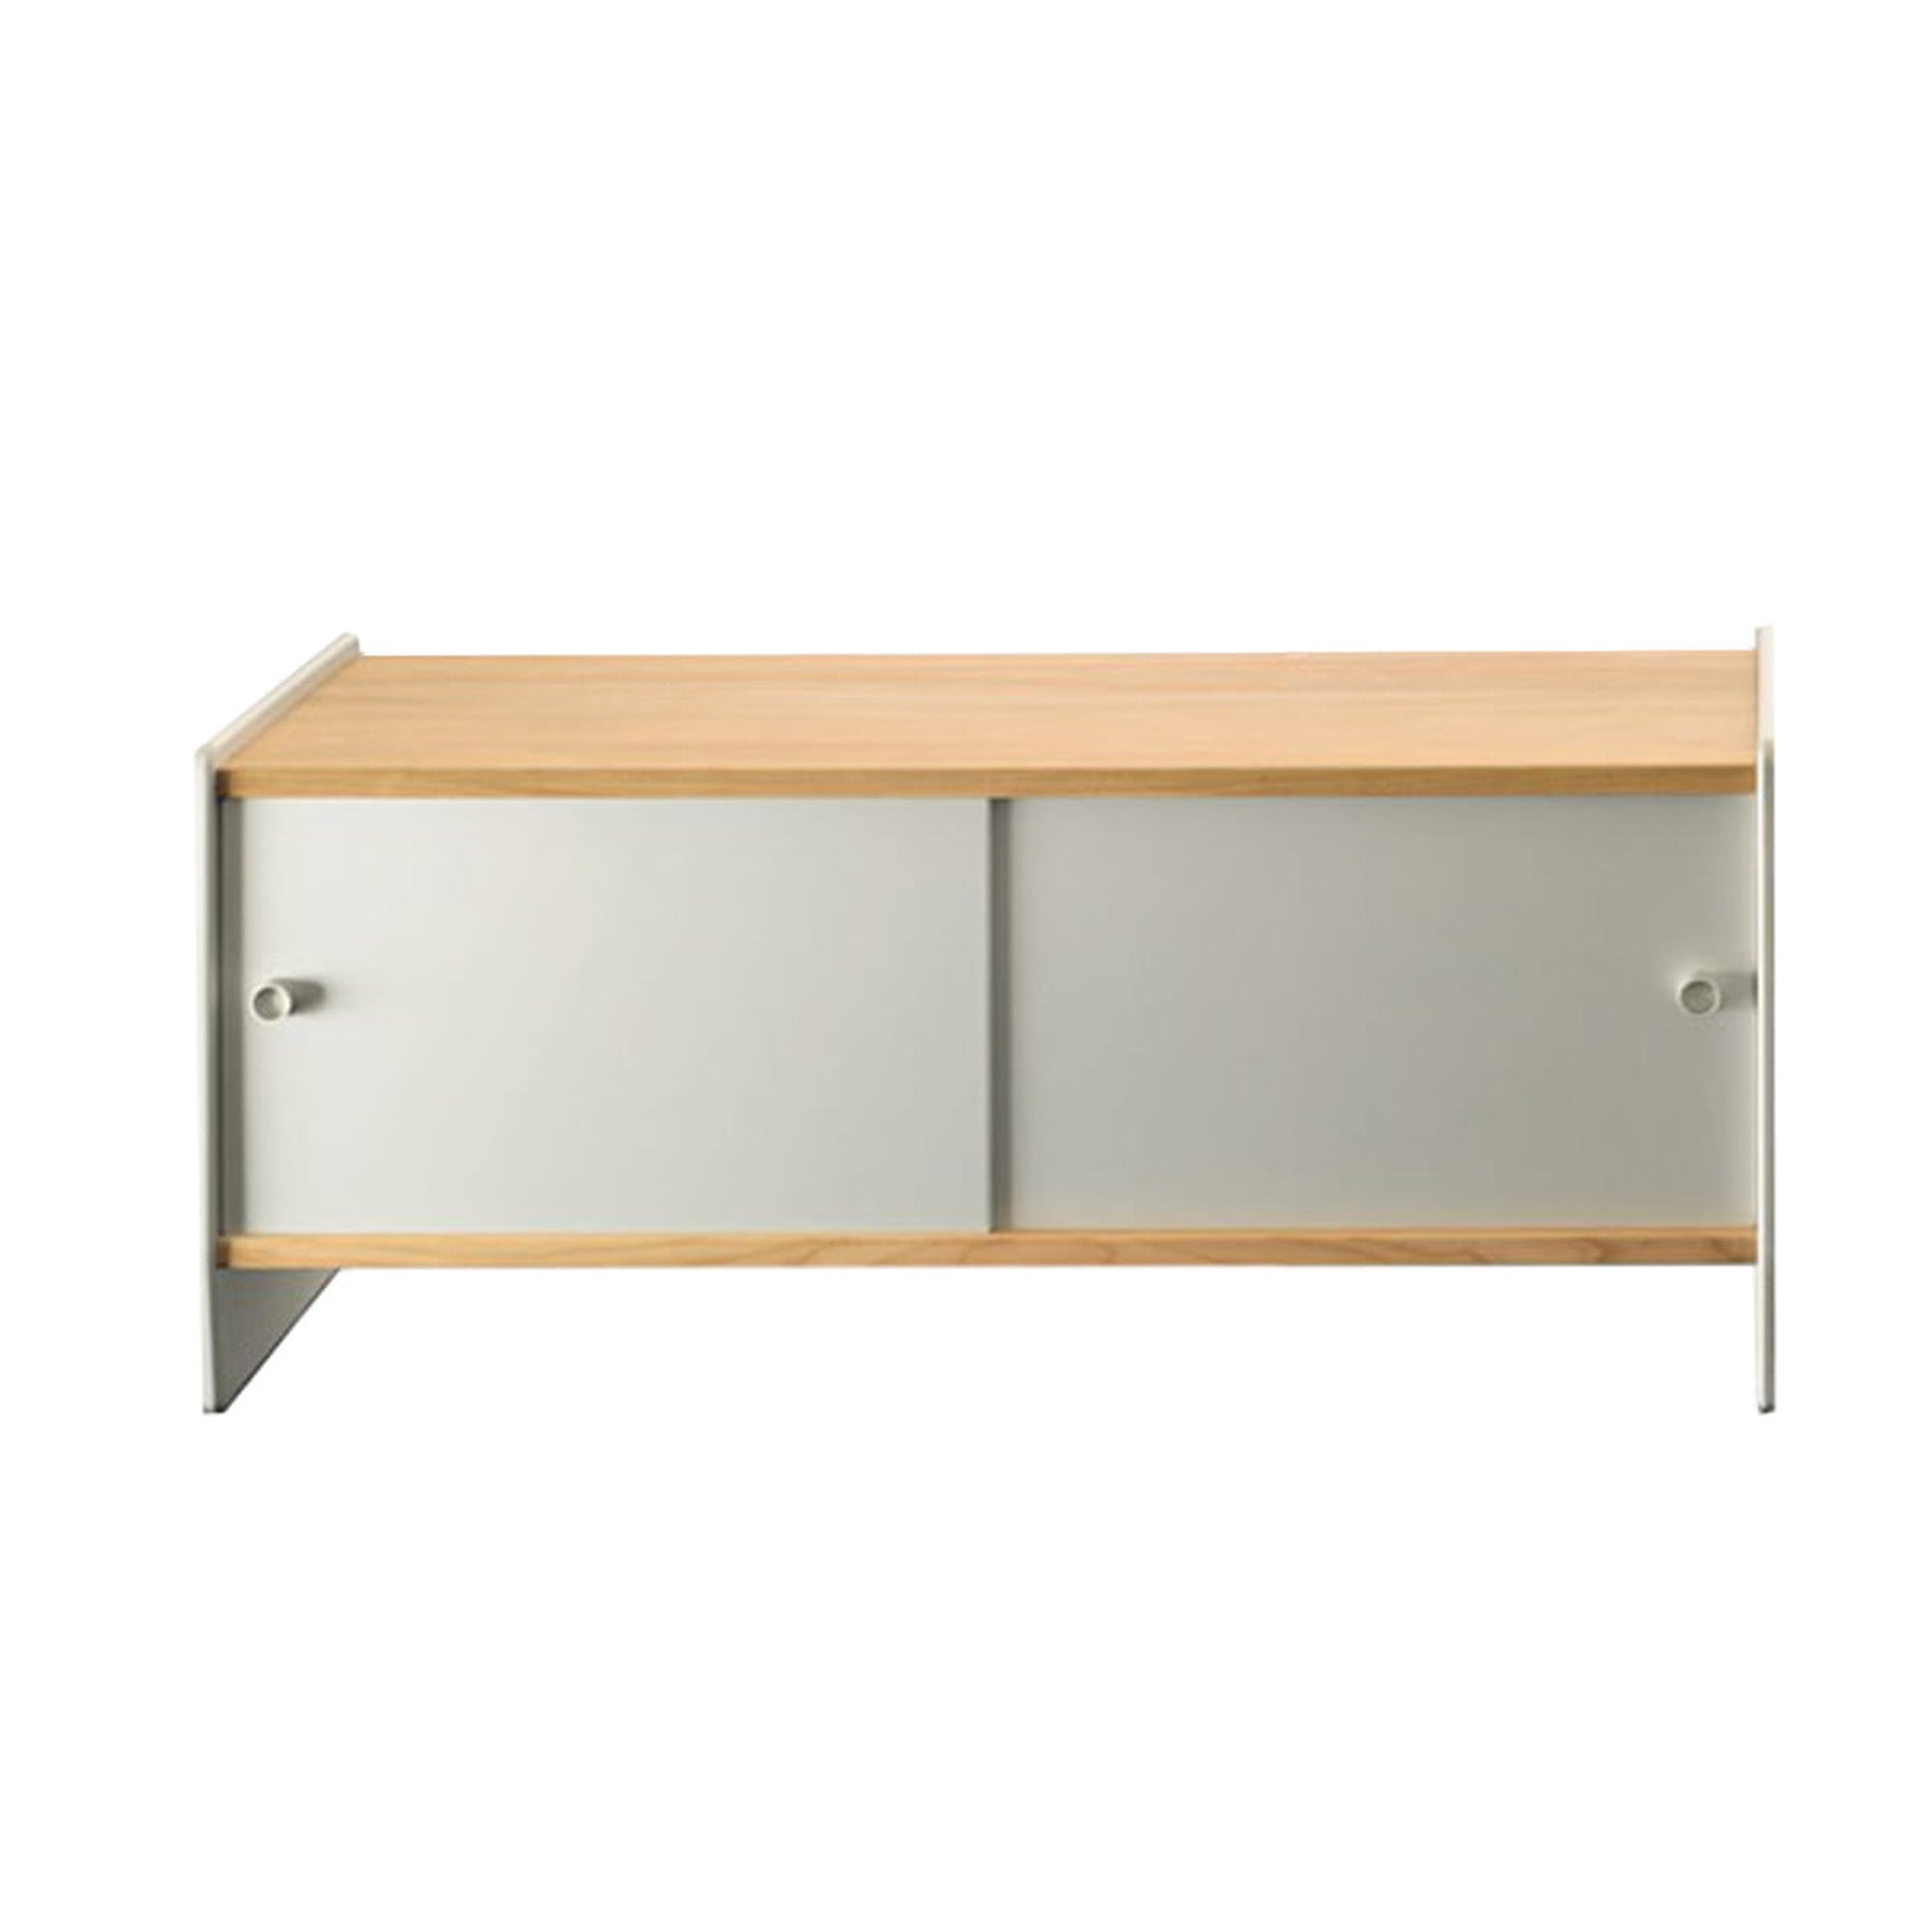 Theca cabinet 93 cm lungime